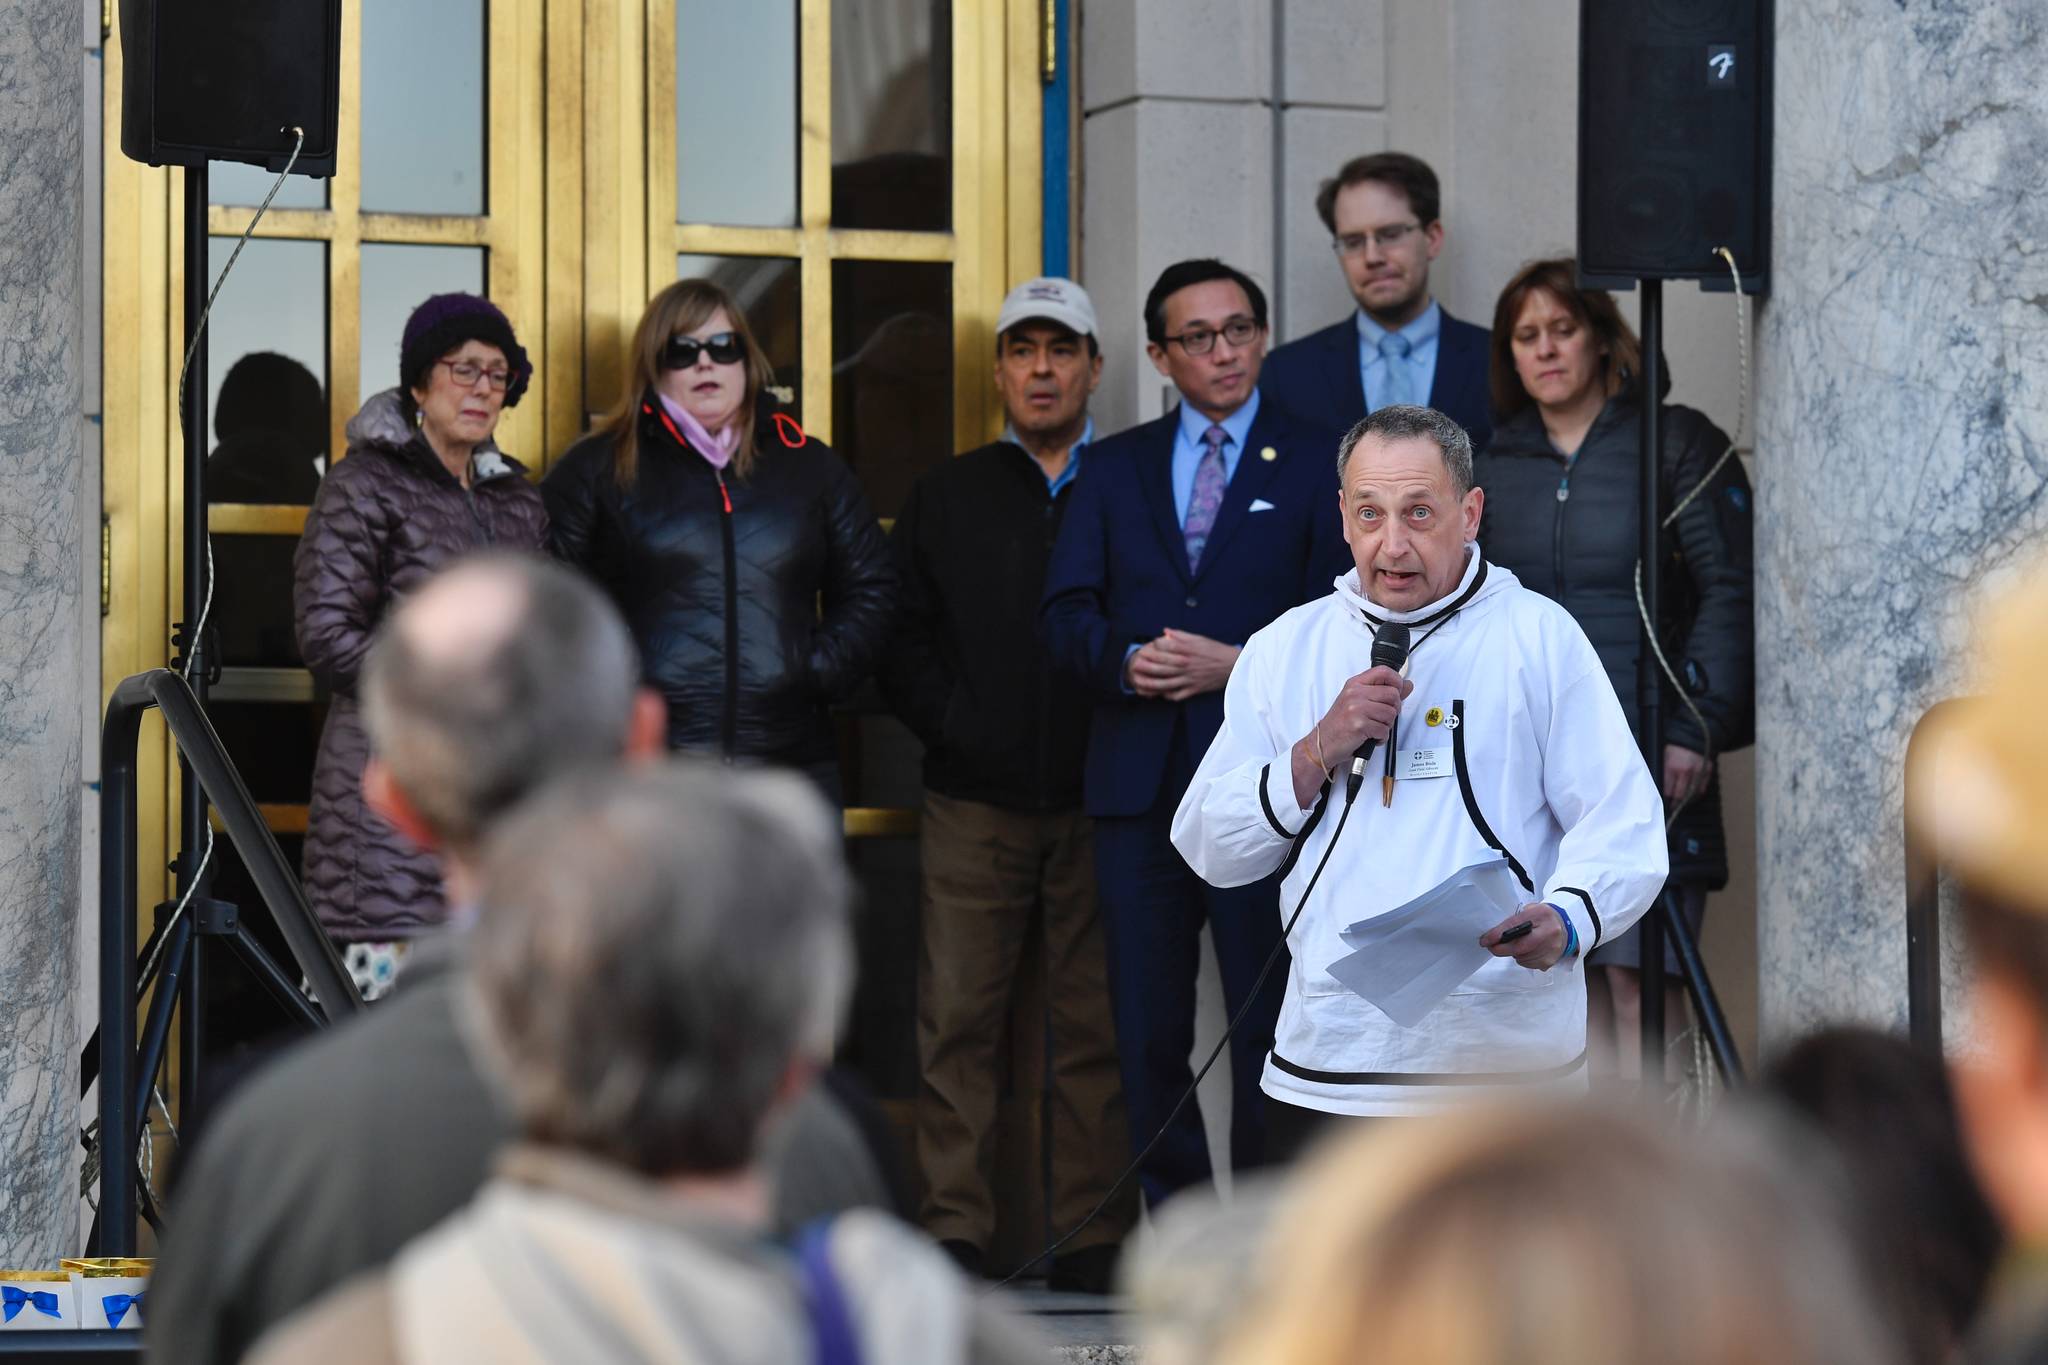 Backed by Alaska legislators, James Biela, lead field advocate the Alaska Chapter of the American Foundation for Suicide Prevention, speaks at a candlelight vigil to raise awareness at the Capitol on Tuesday, March 26, 2019. (Michael Penn | Juneau Empire)